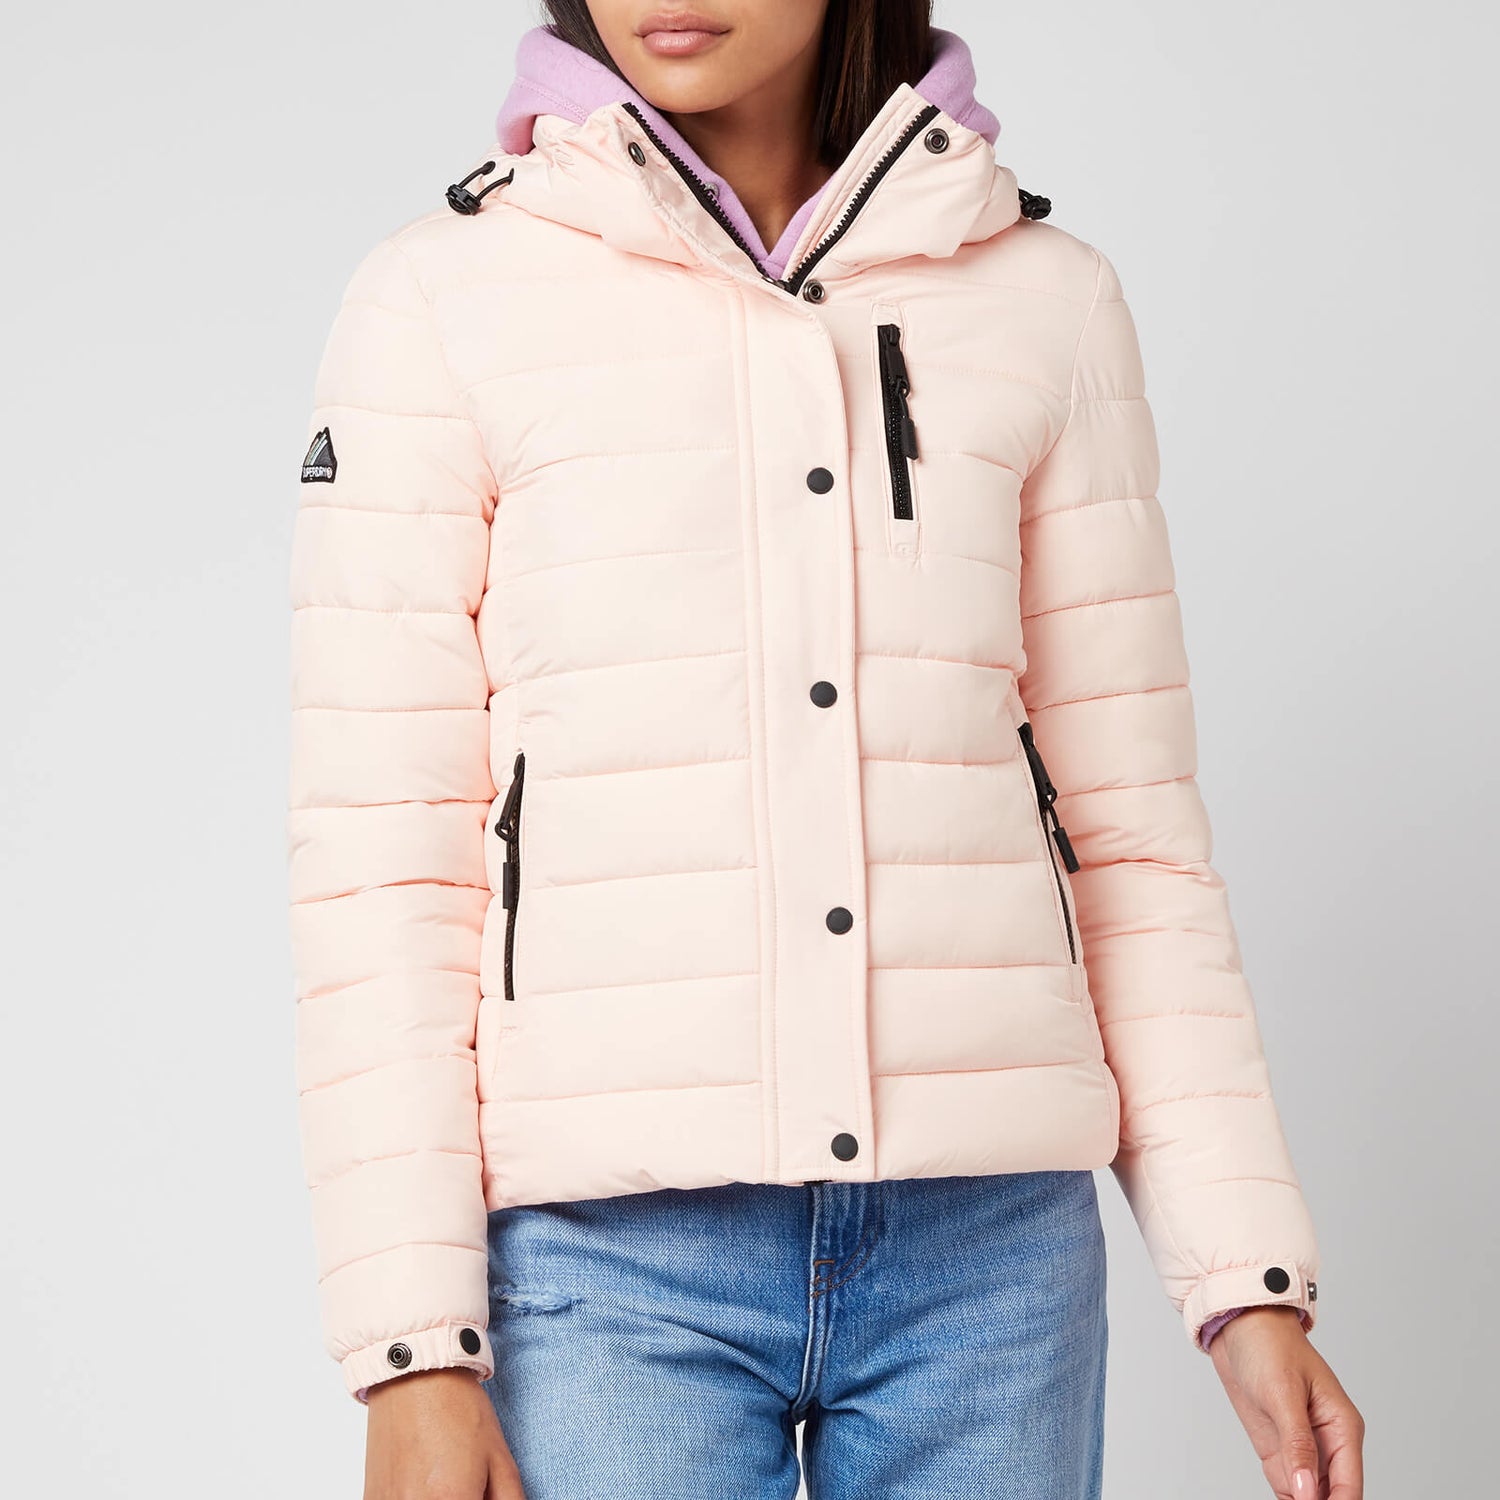 Superdry Women's Classic Fuji Jacket - Pink Clay